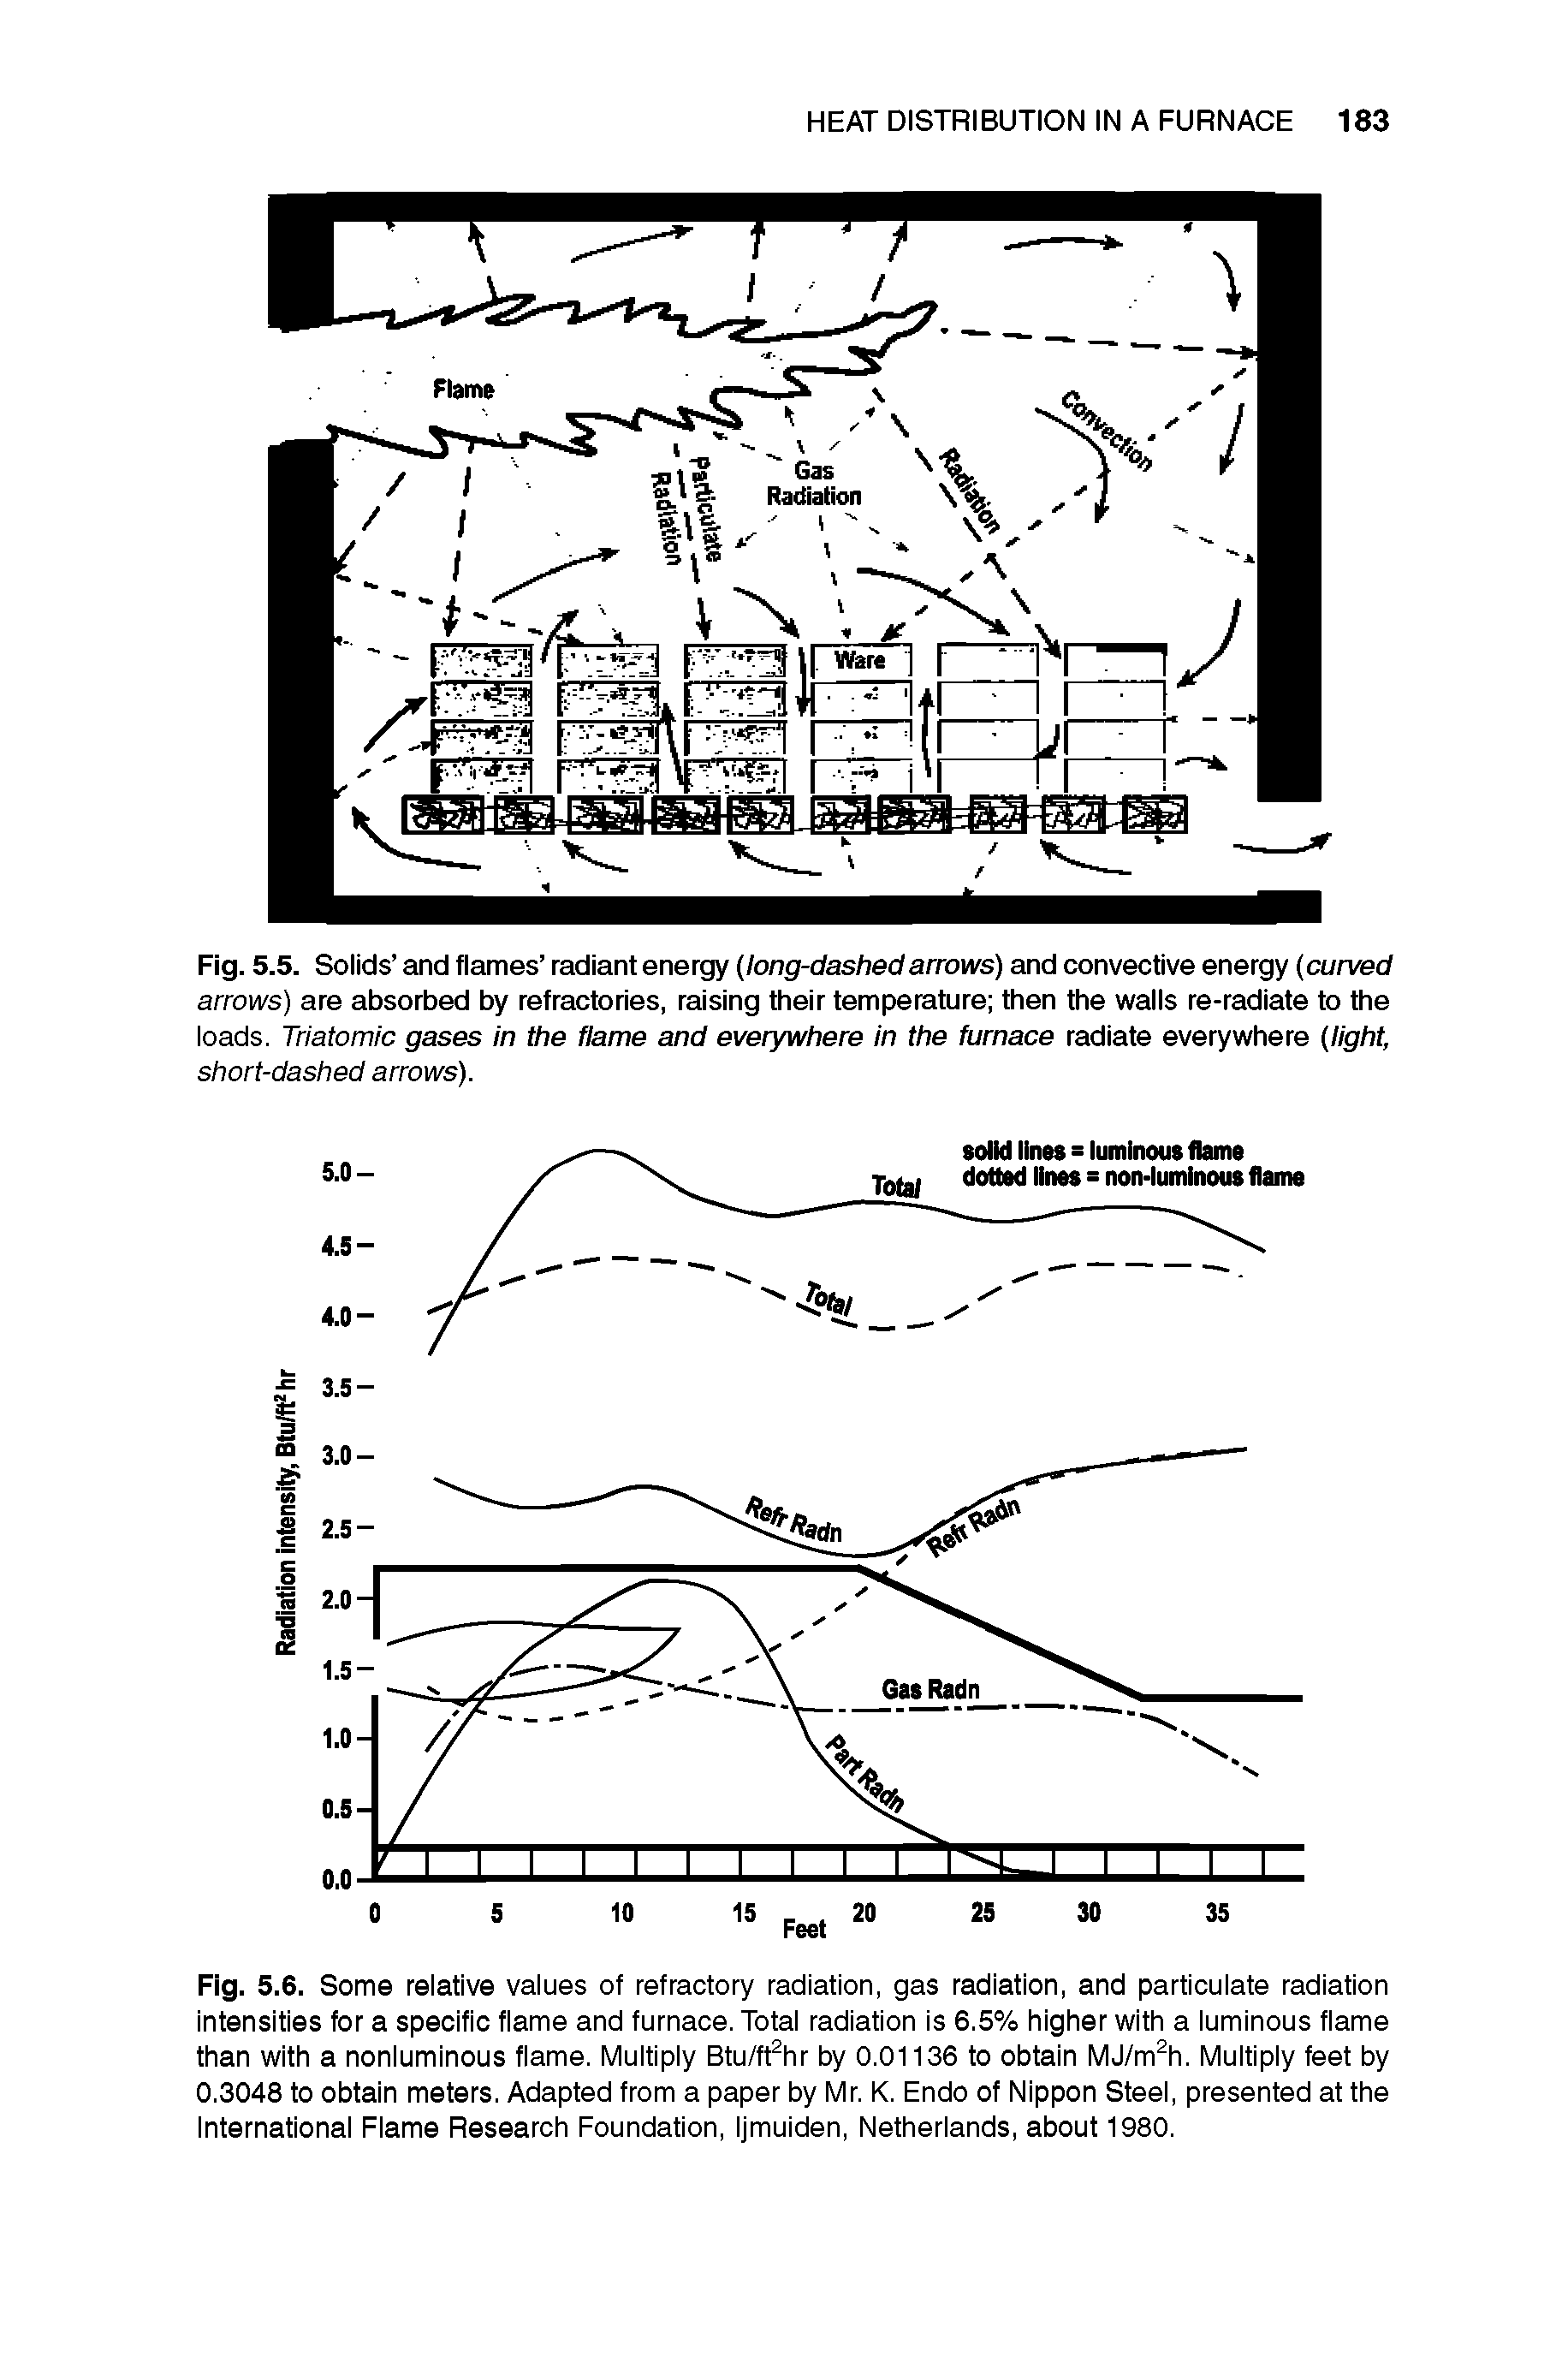 Fig. 5.6. Some relative values of refractory radiation, gas radiation, and particulate radiation intensities for a specific flame and furnace. Total radiation is 6.5% higher with a luminous flame than with a nonluminous flame. Multiply Btu/ft hr by 0.01136 to obtain MJ/m h. Multiply feet by 0.3048 to obtain meters. Adapted from a paper by Mr. K. Endo of Nippon Steel, presented at the International Flame Research Foundation, Ijmuiden, Netherlands, about 1980.